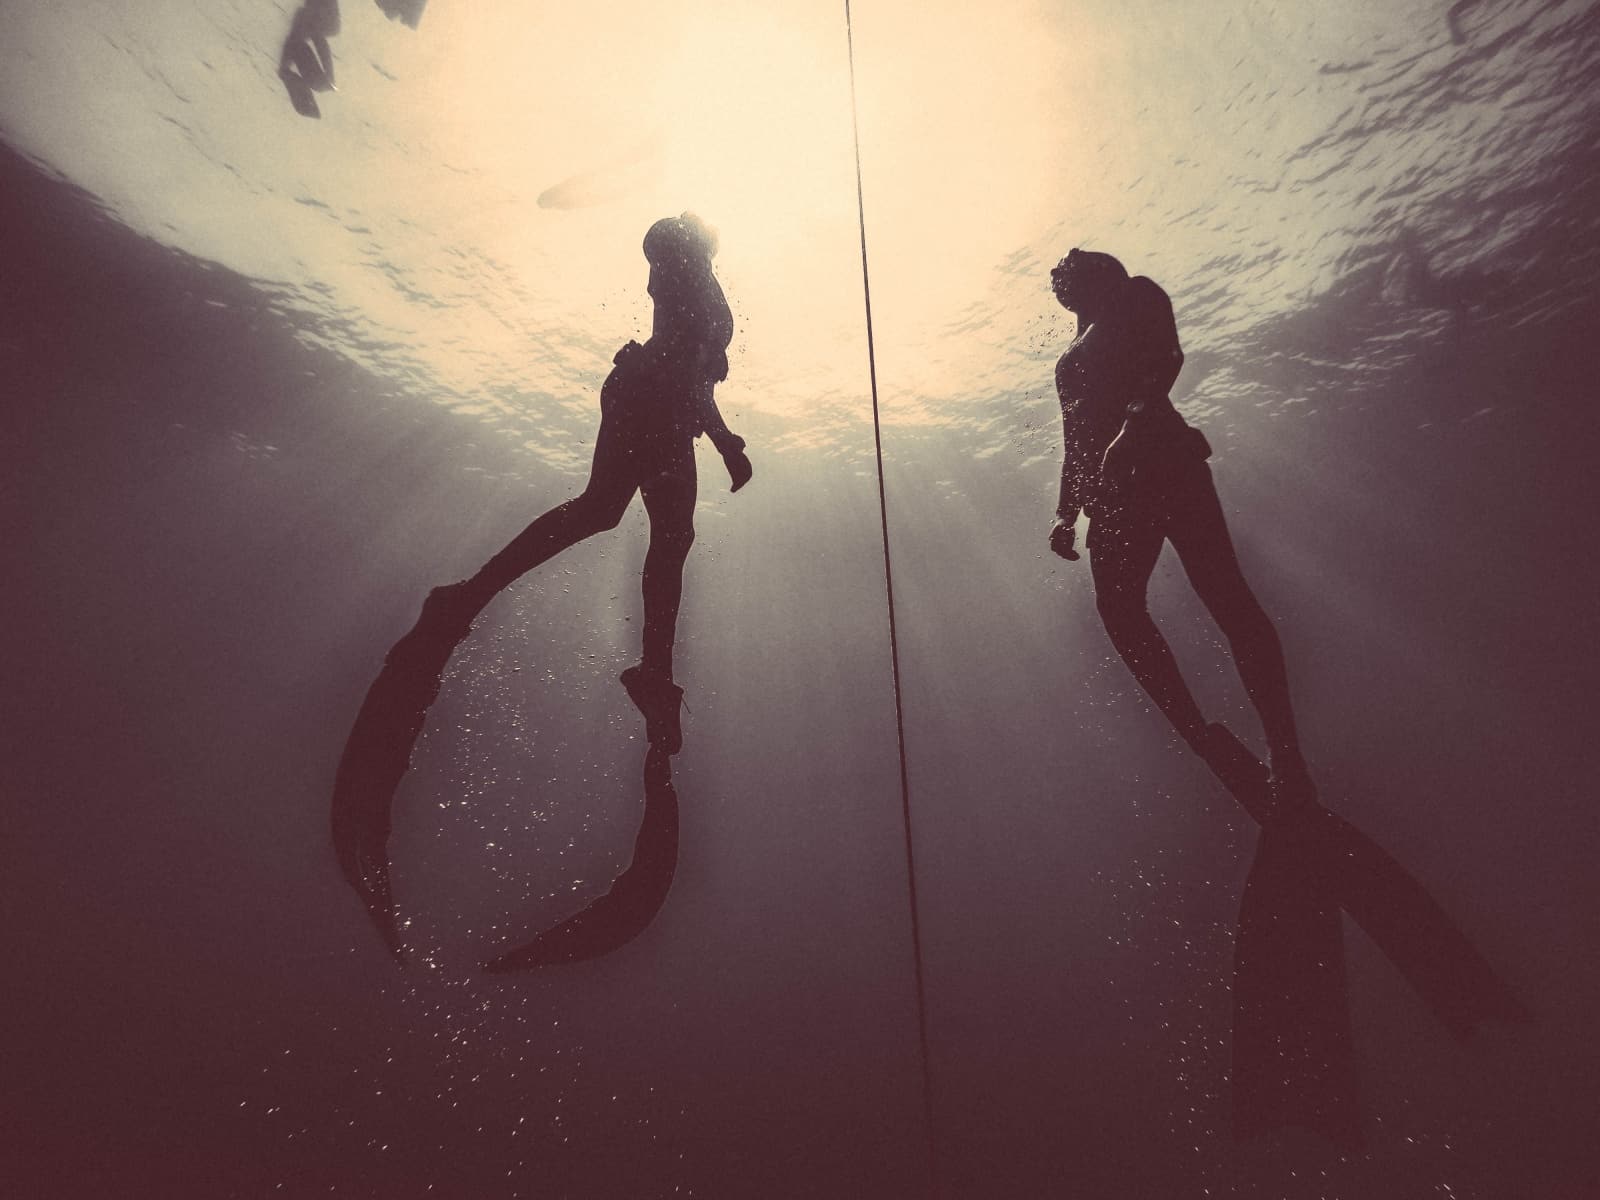 freediving competitions